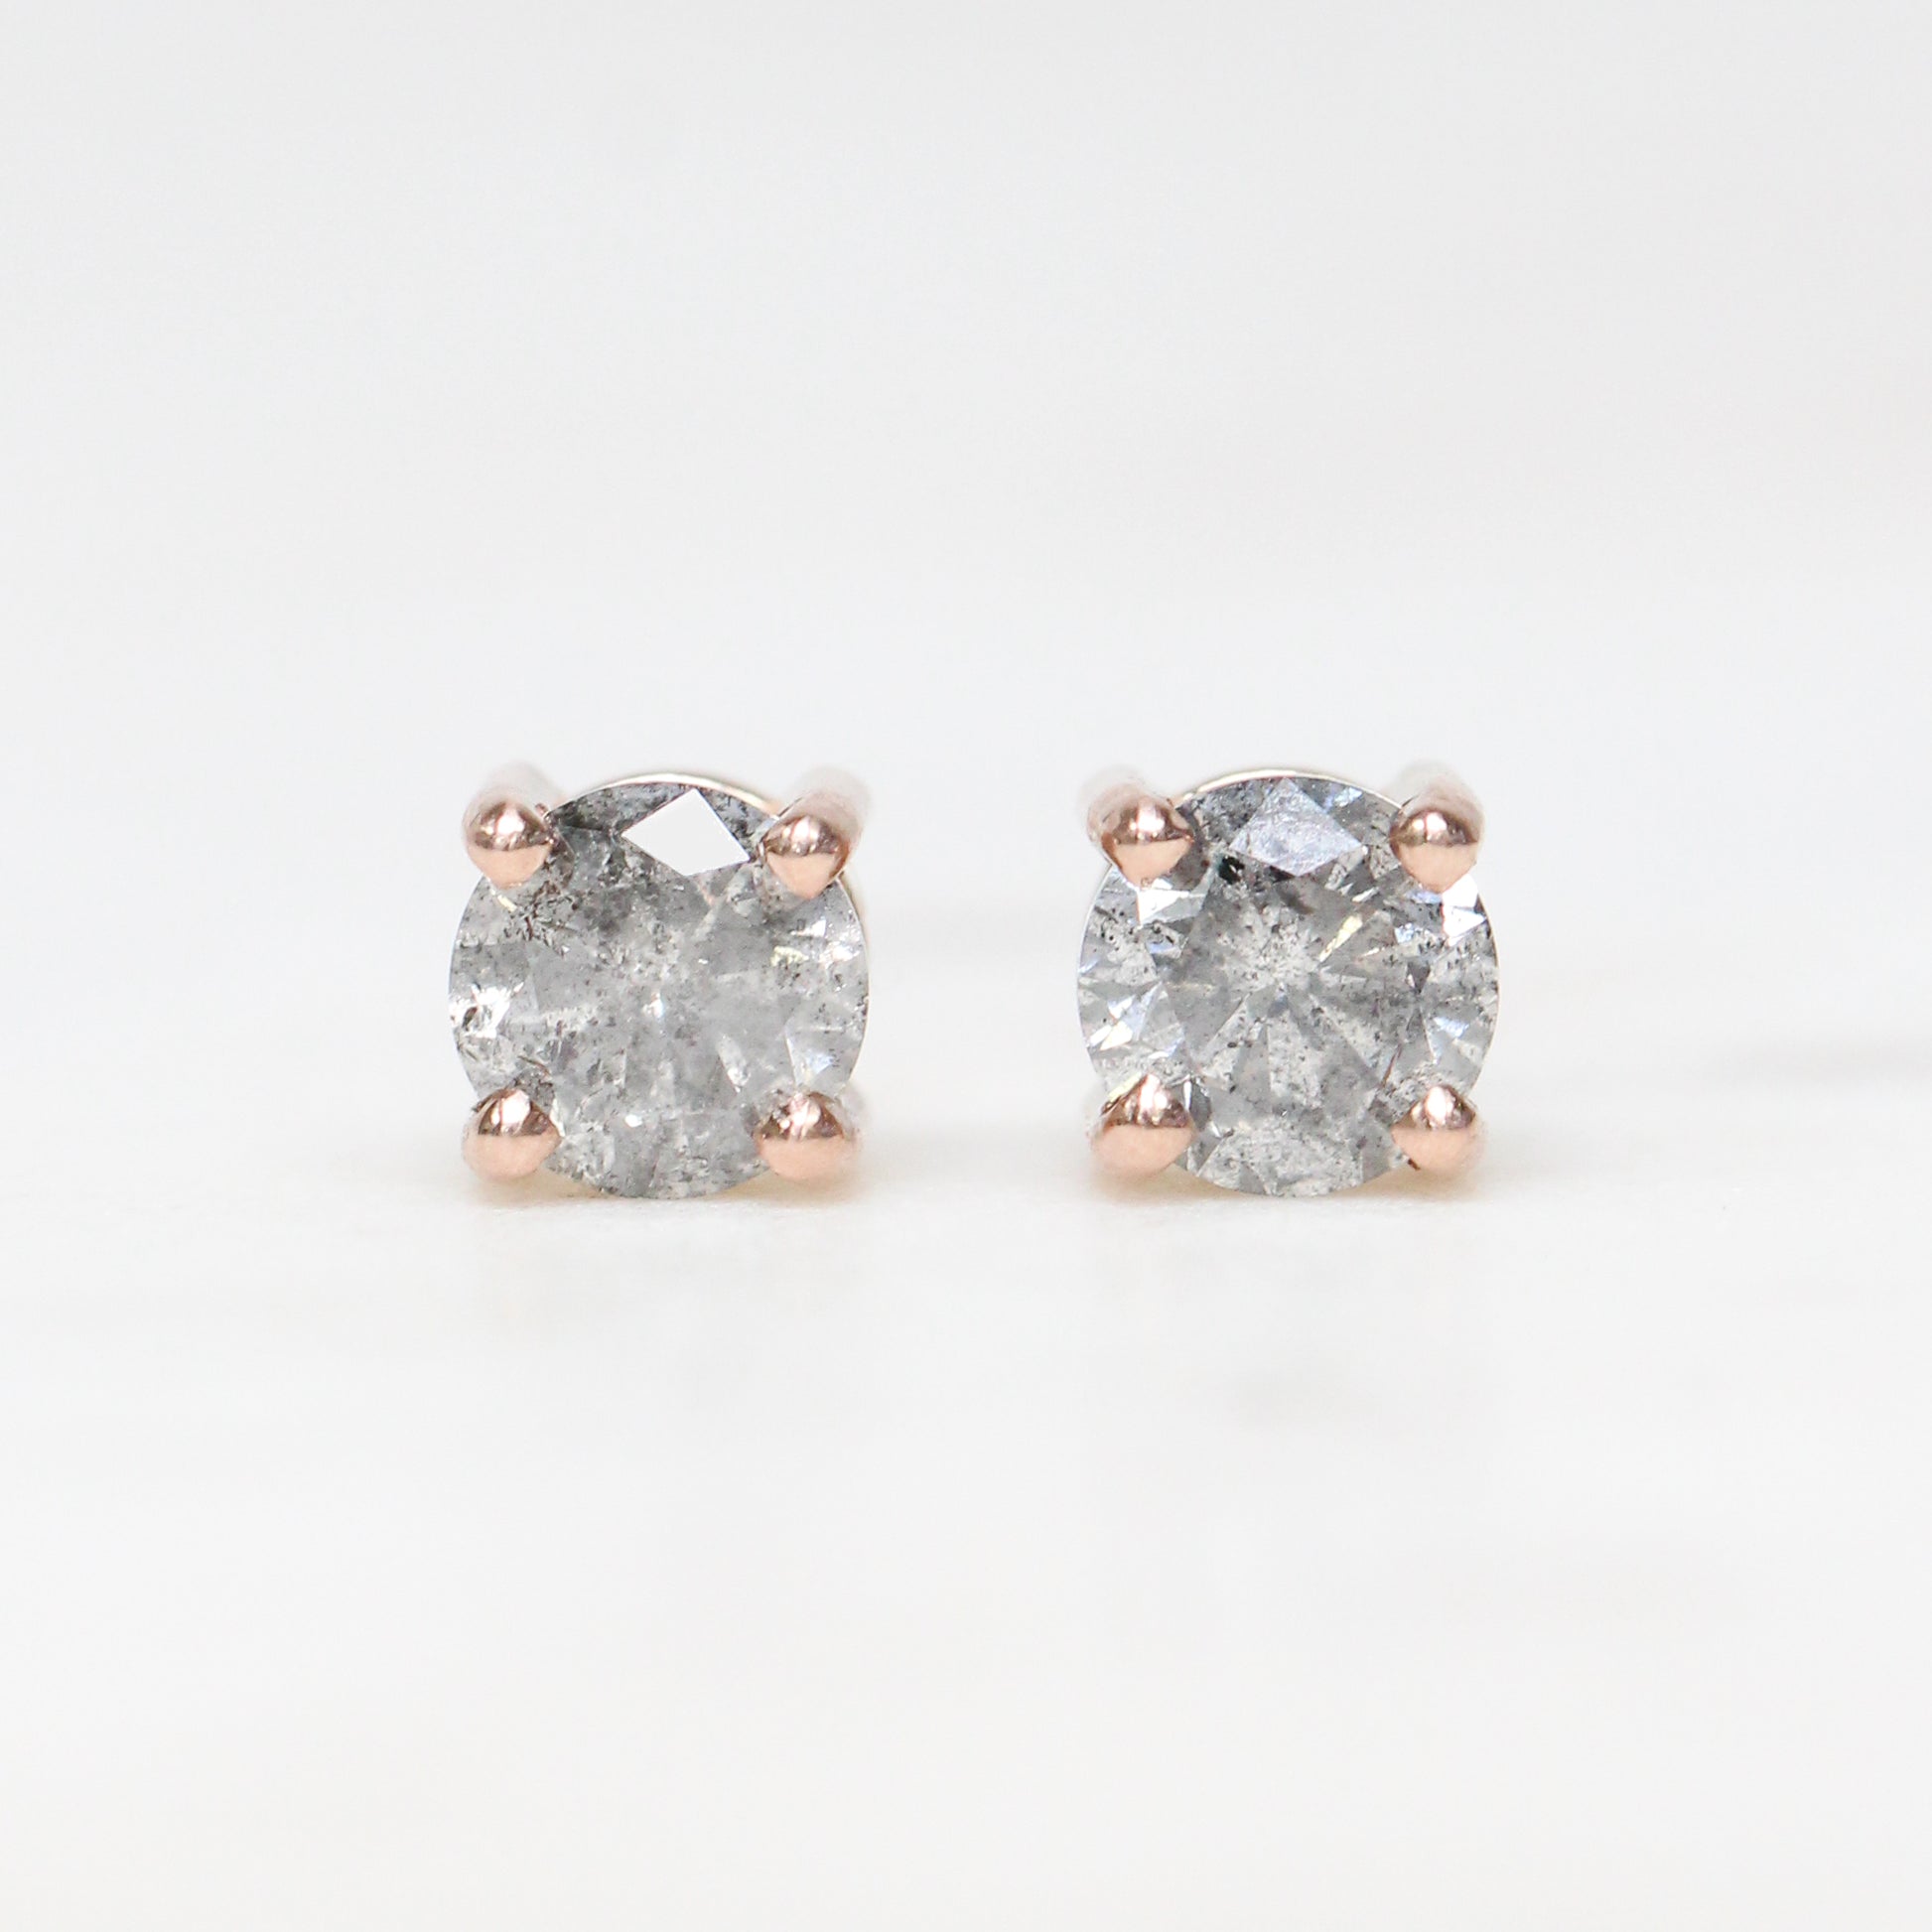 Rose Cut 4.25mm-4.5mm Misty Gray Salt and Pepper Diamond Earring Studs in  14k Yellow Gold - Ready to Ship